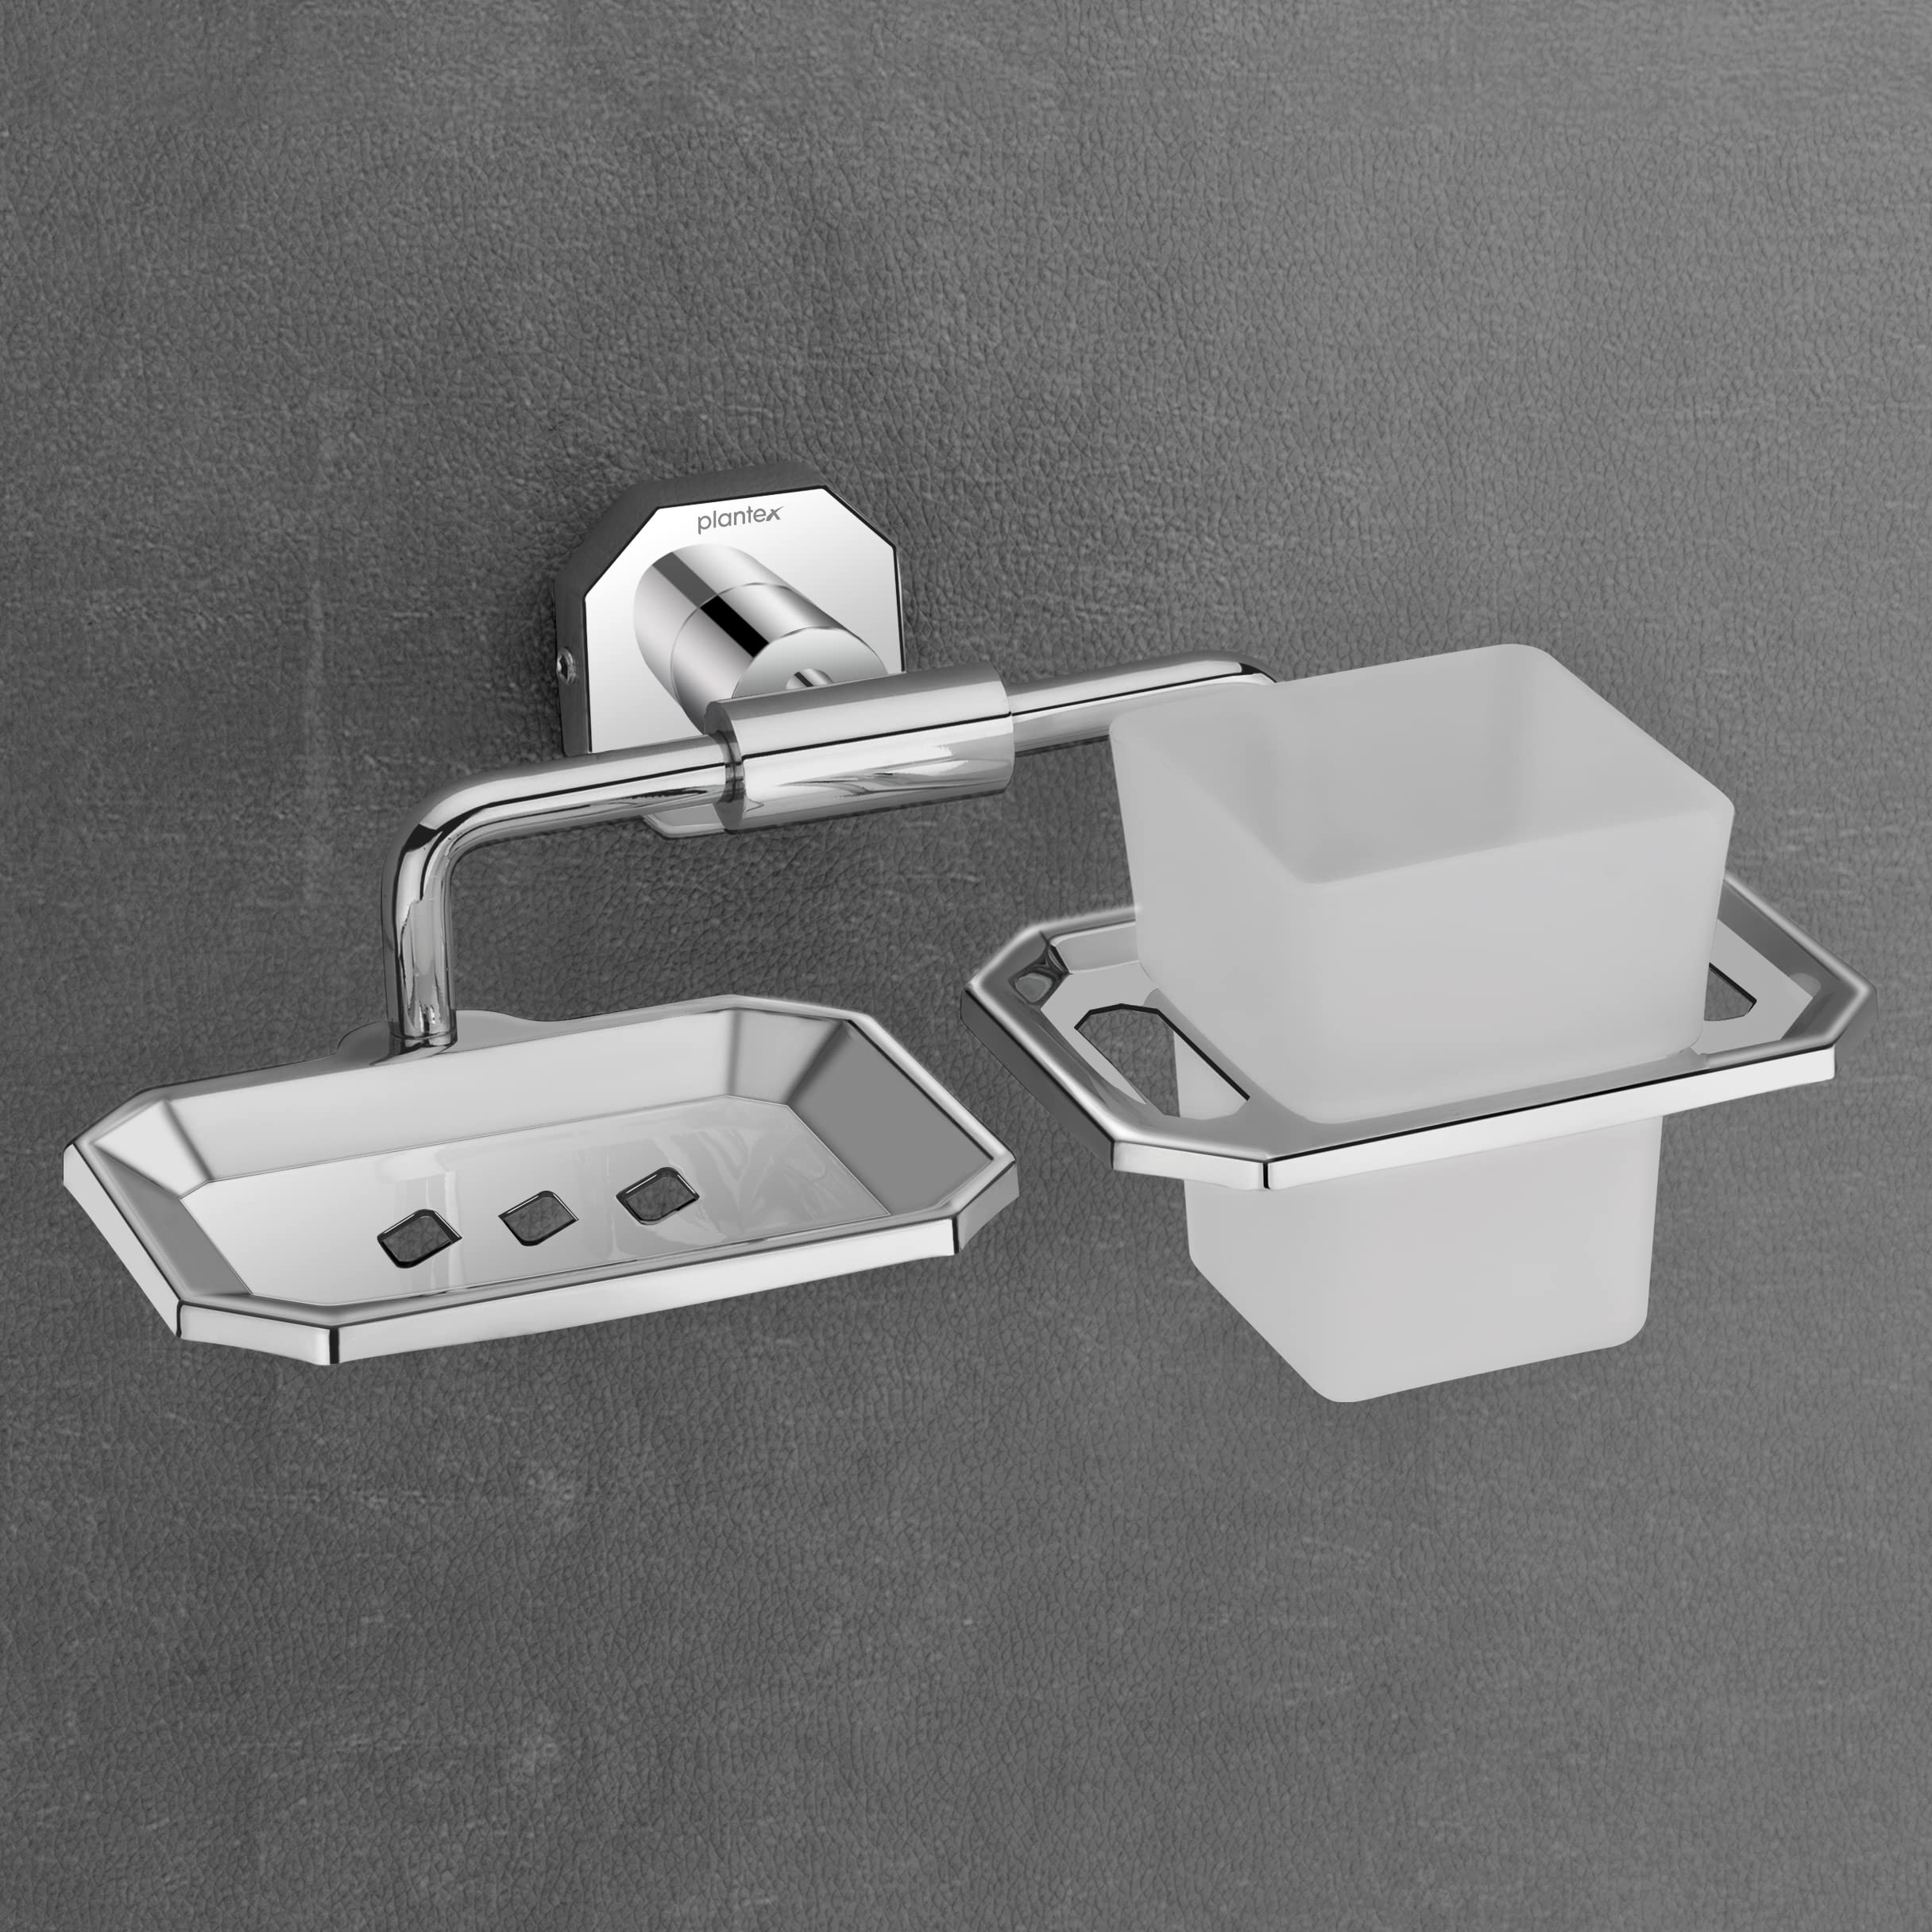 Plantex Nipron Bathroom soap Holder and Brush Stand for wash Basin (304 Stainless Steel)